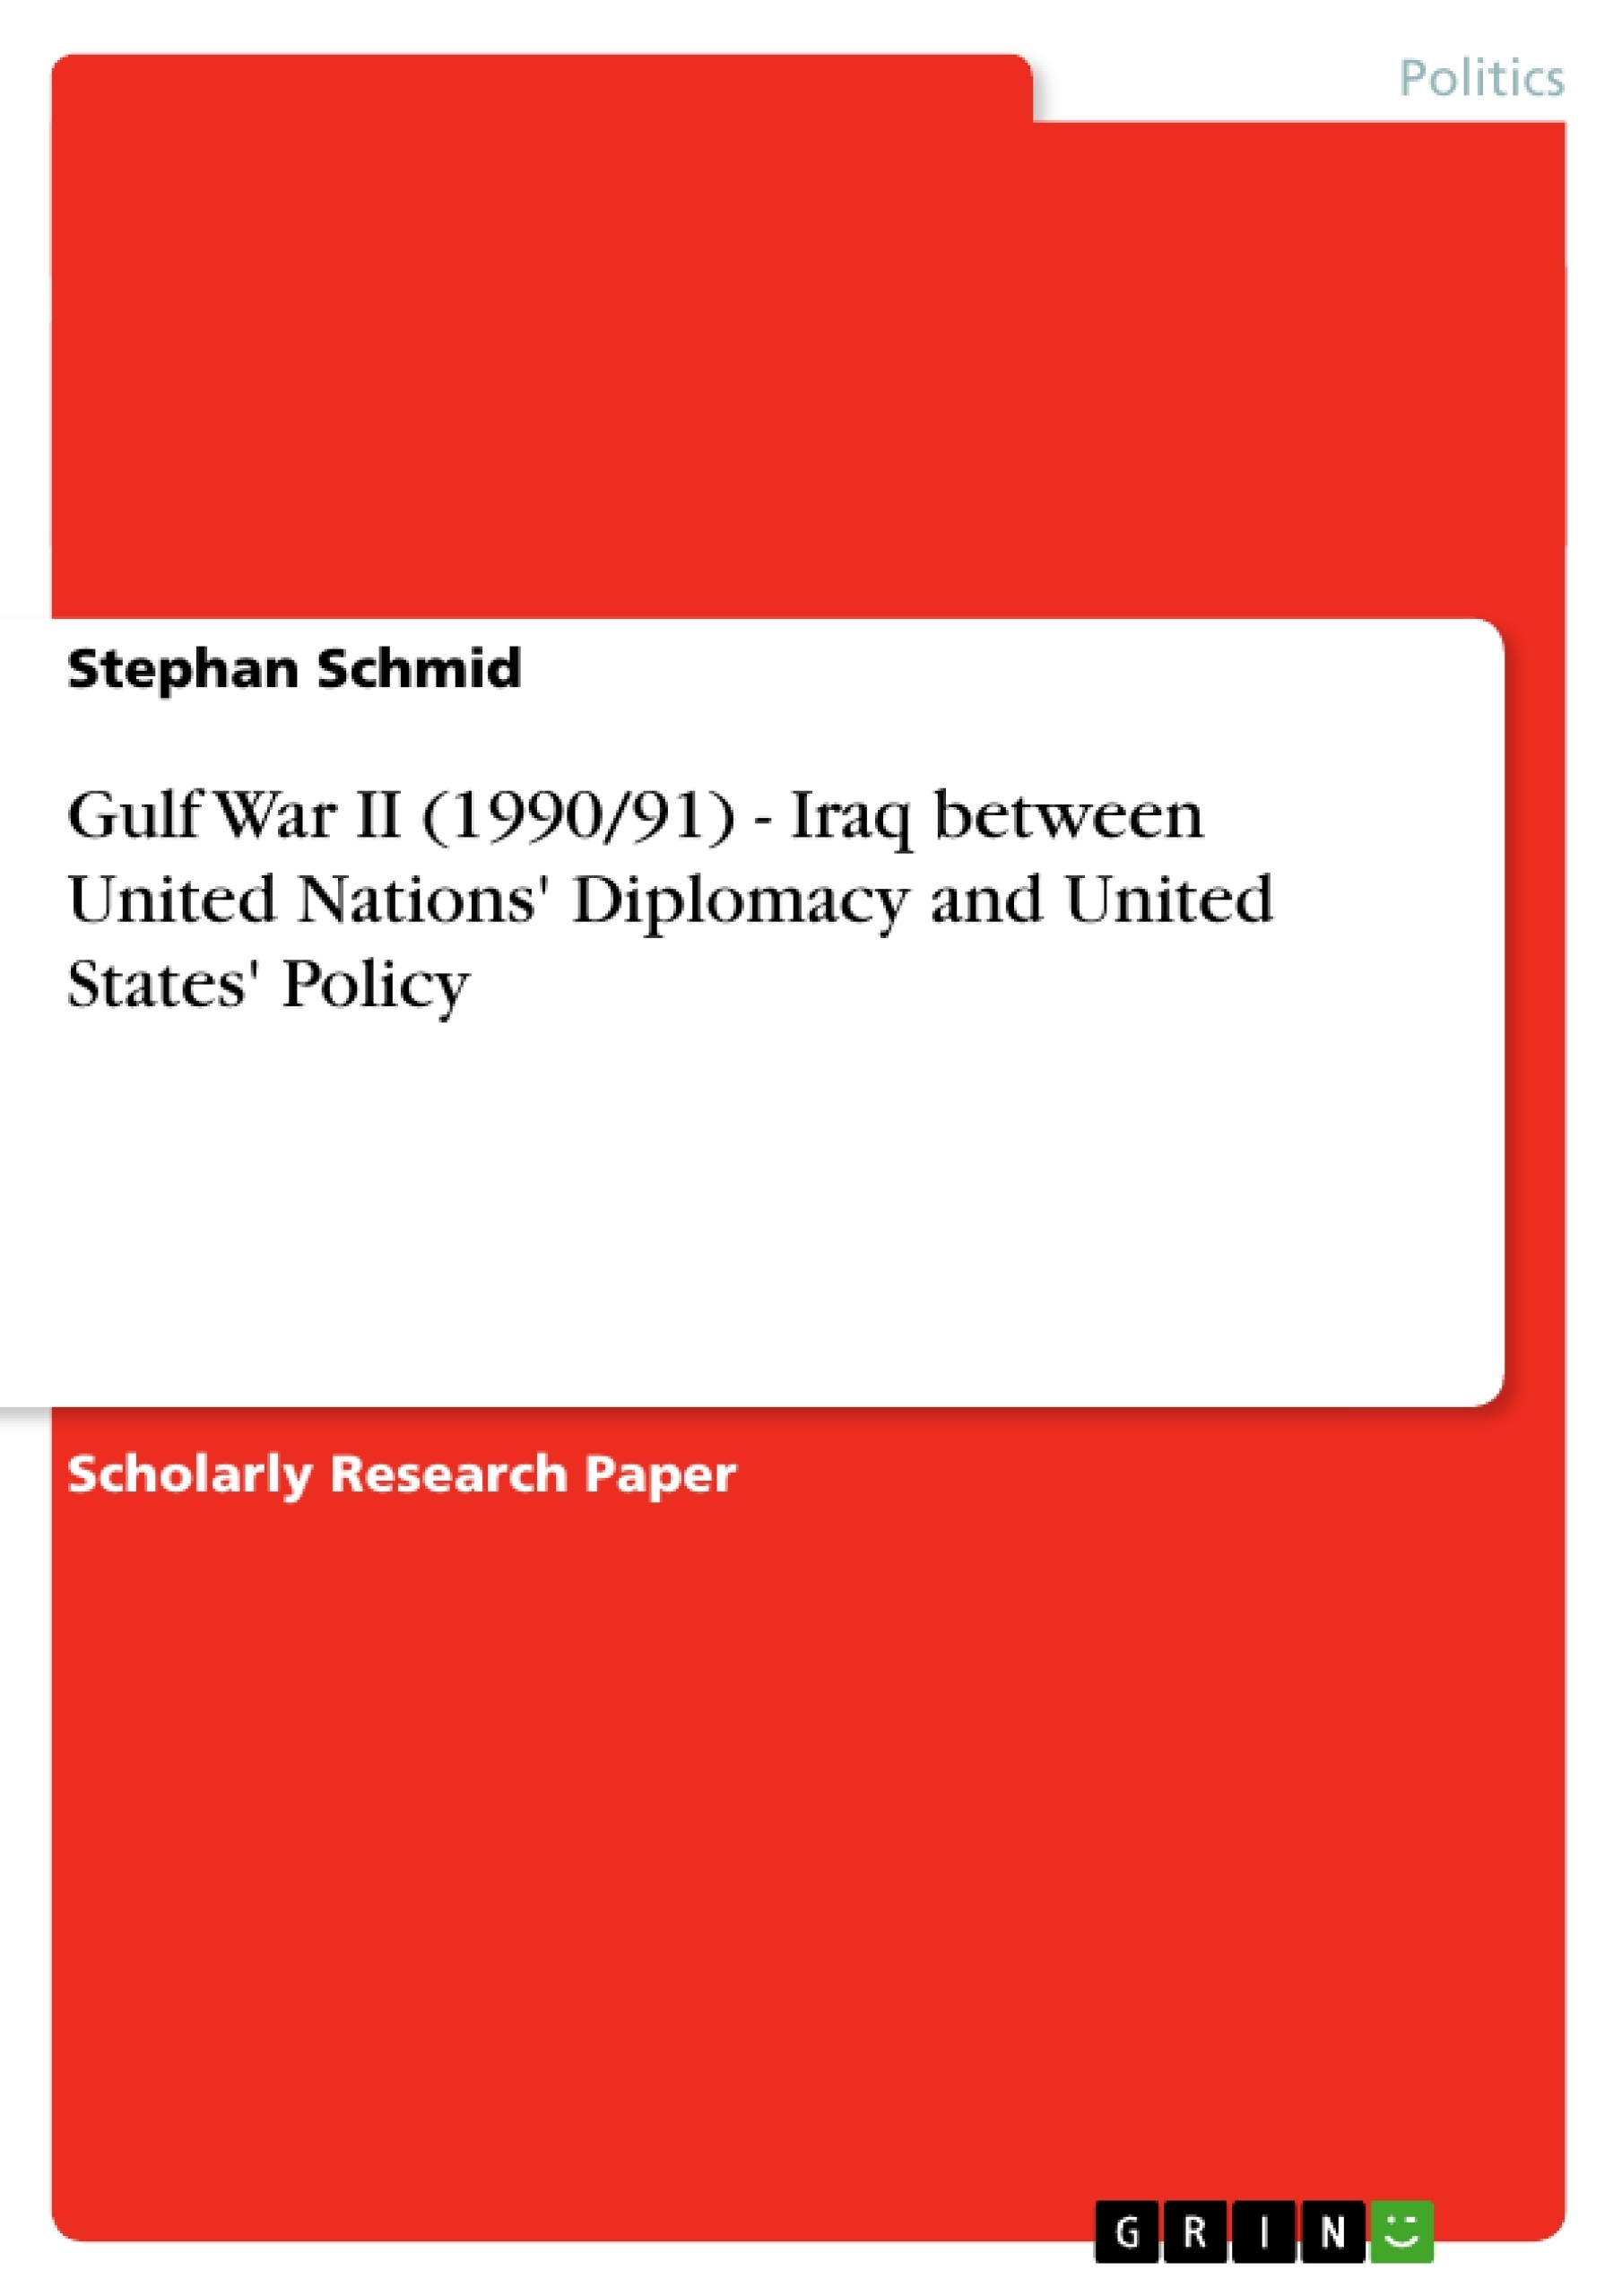 Titel: Gulf War II (1990/91)  -  Iraq between United Nations' Diplomacy and United States' Policy